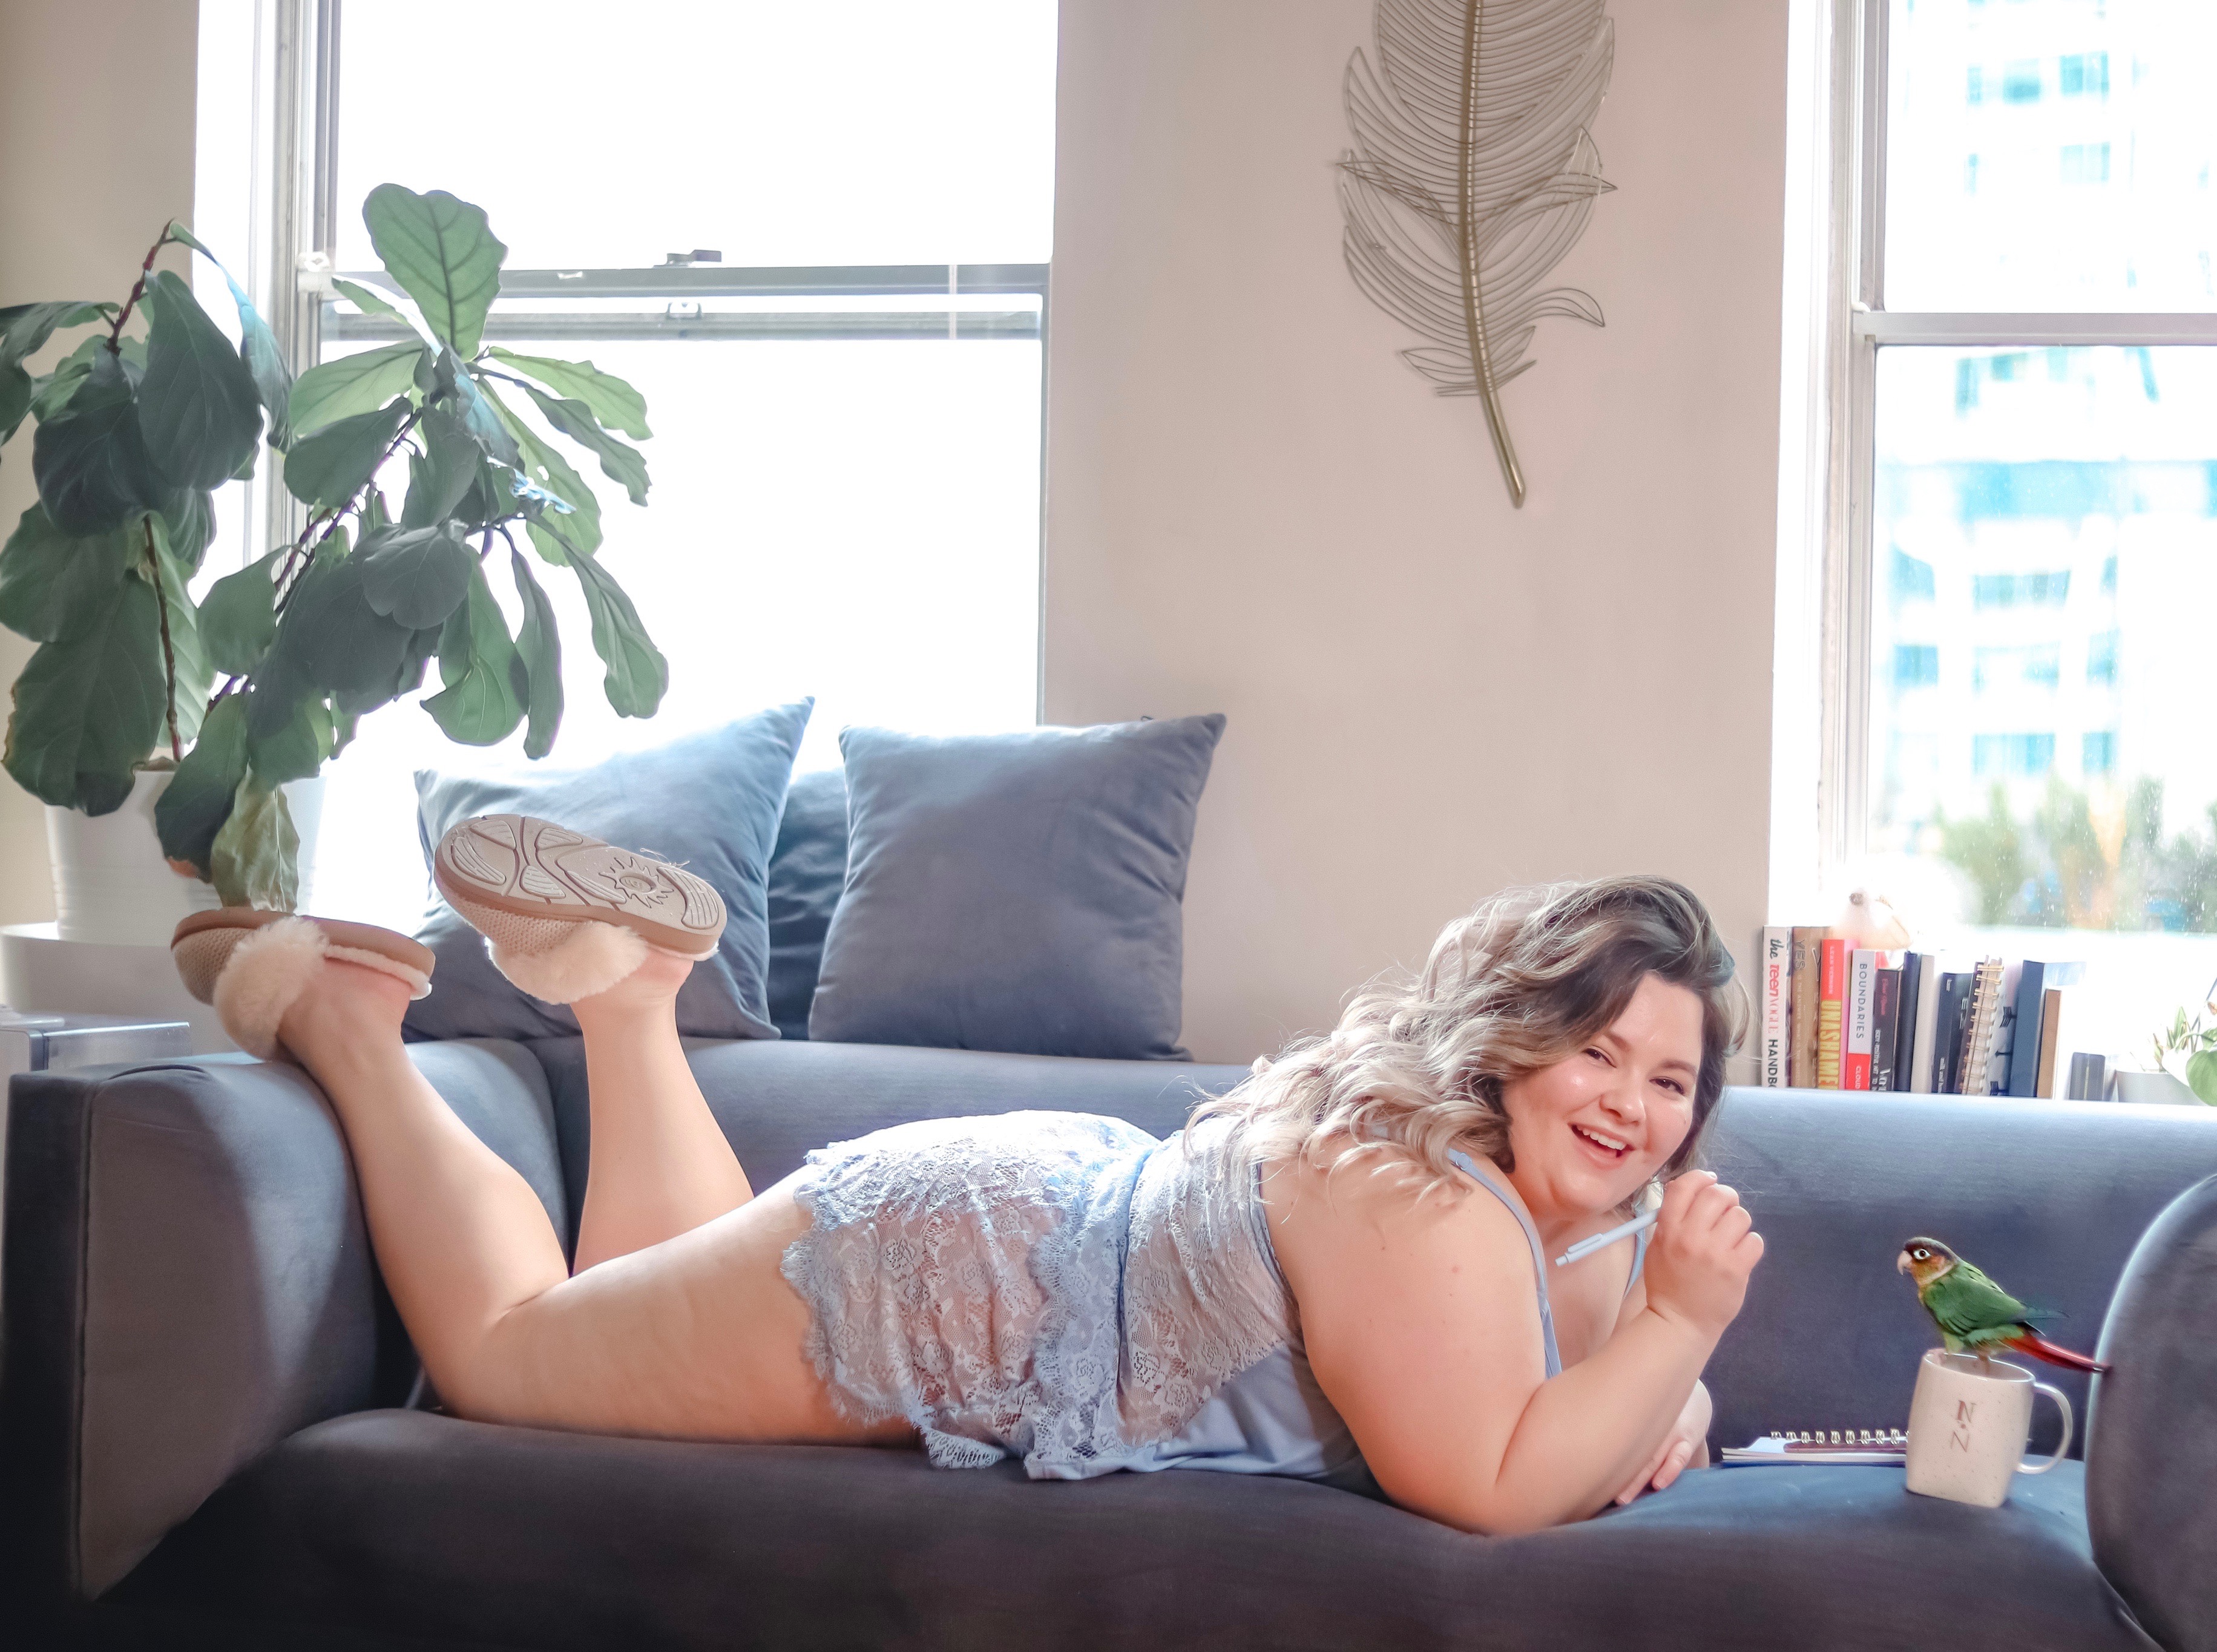 Chicago Plus Size Petite Fashion Blogger Natalie in the City reviews Adore Me lingerie and plus size pajamas.